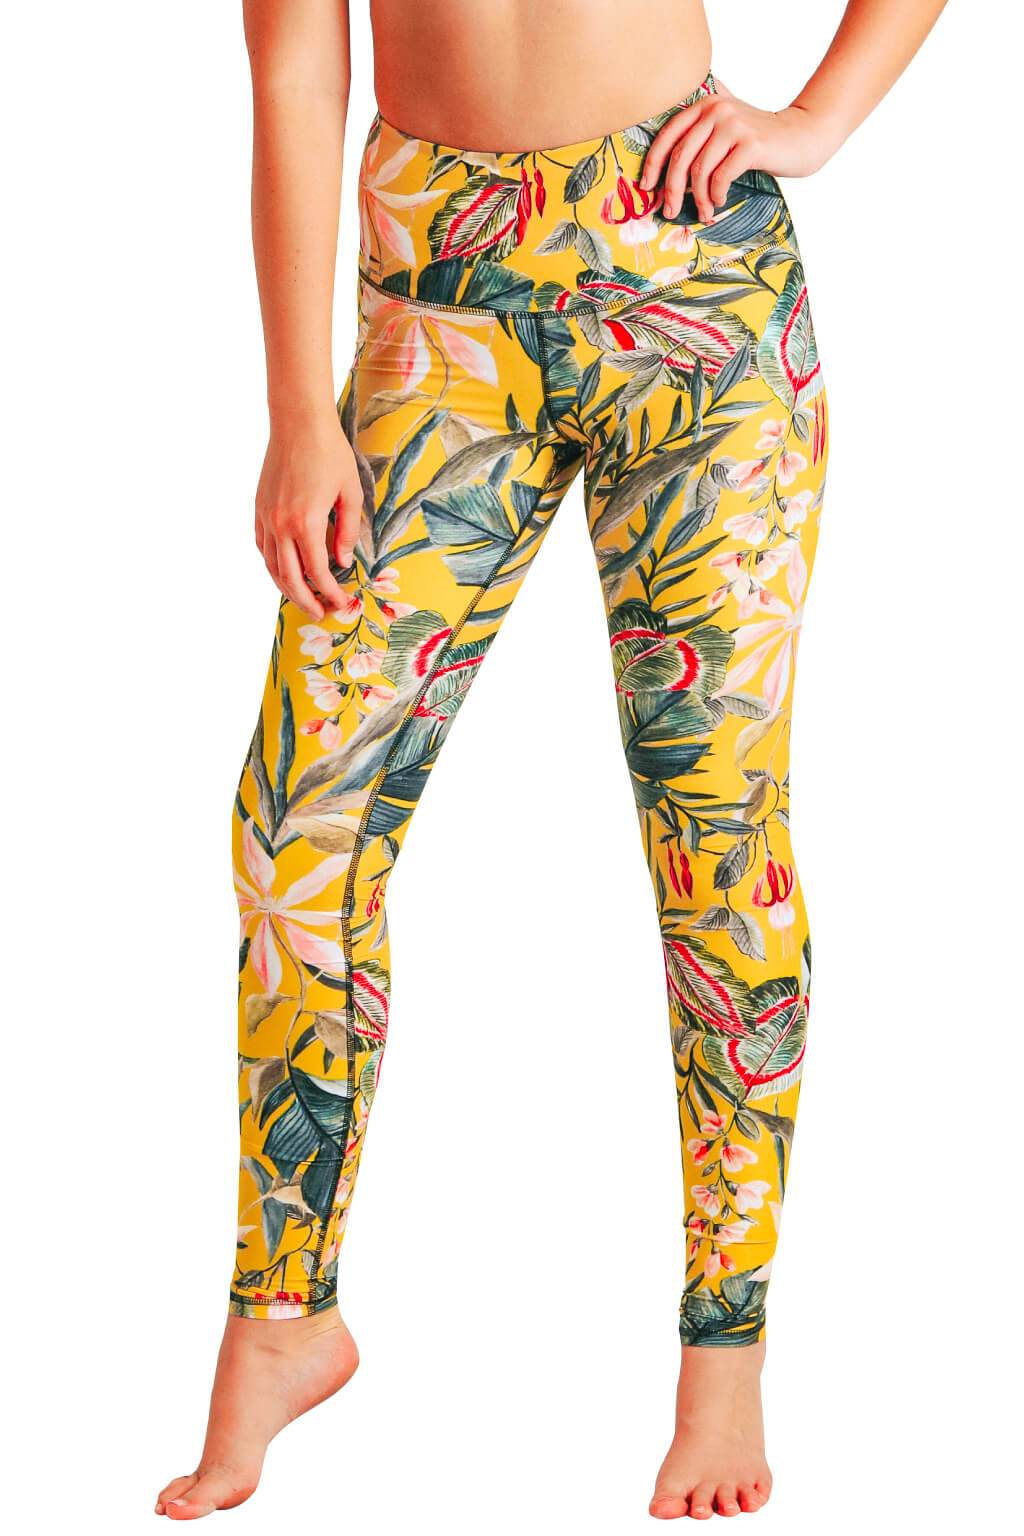 Curry Up Eco-Friendly Women's Printed Yoga Leggings